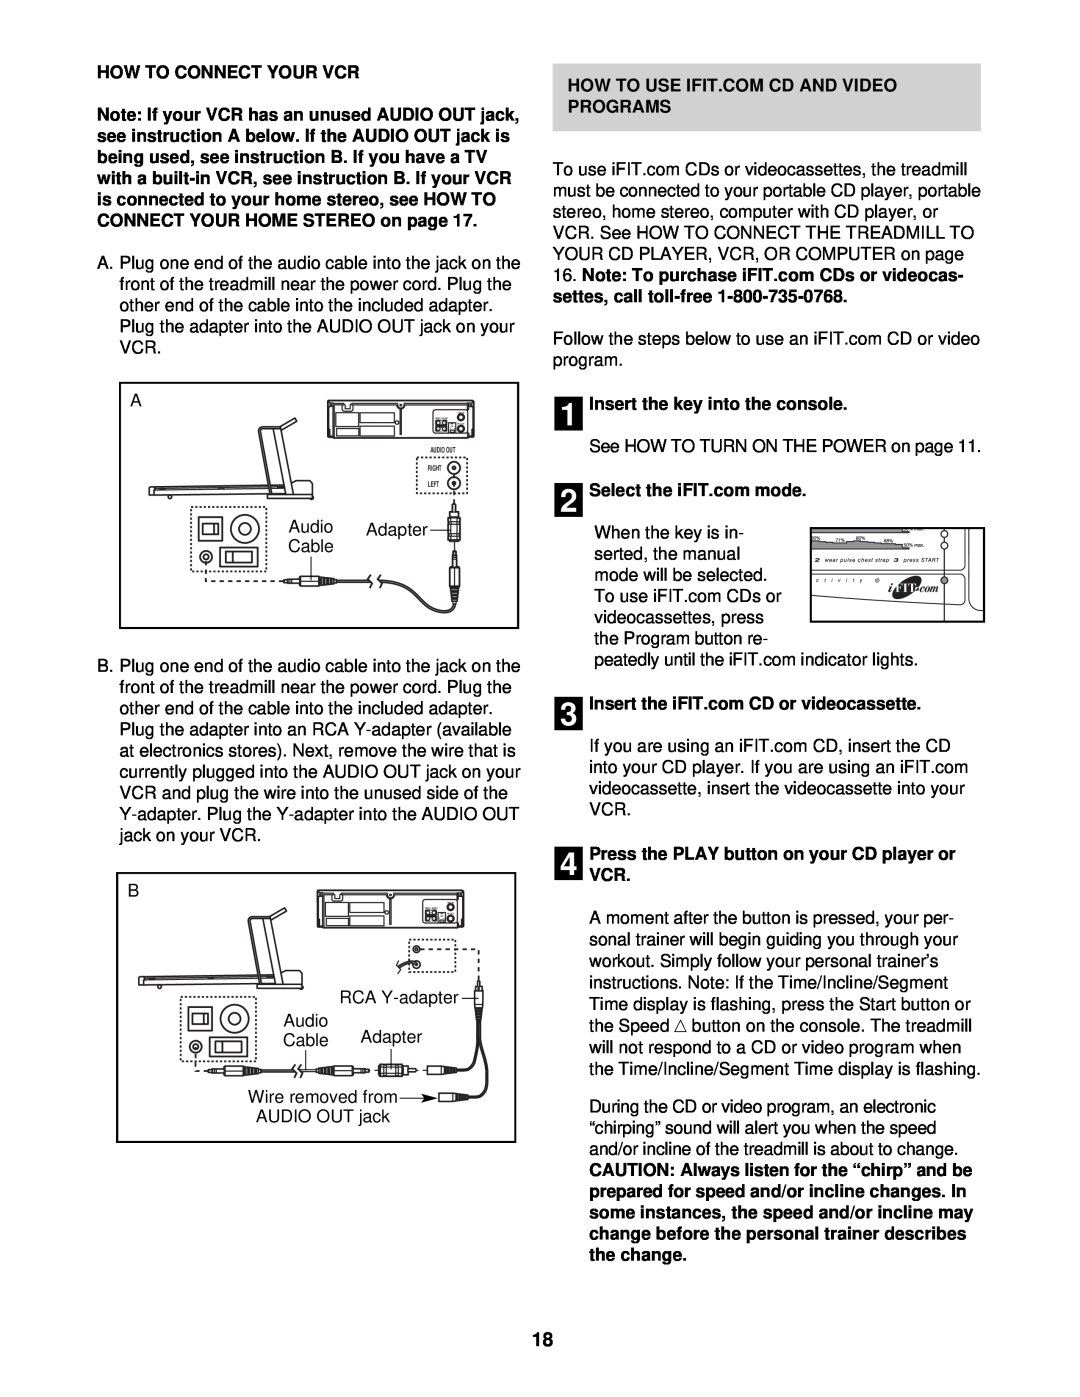 ProForm PFTL49721 user manual How To Connect Your Vcr, How To Use Ifit.Com Cd And Video Programs, Audio, Adapter, Cable 